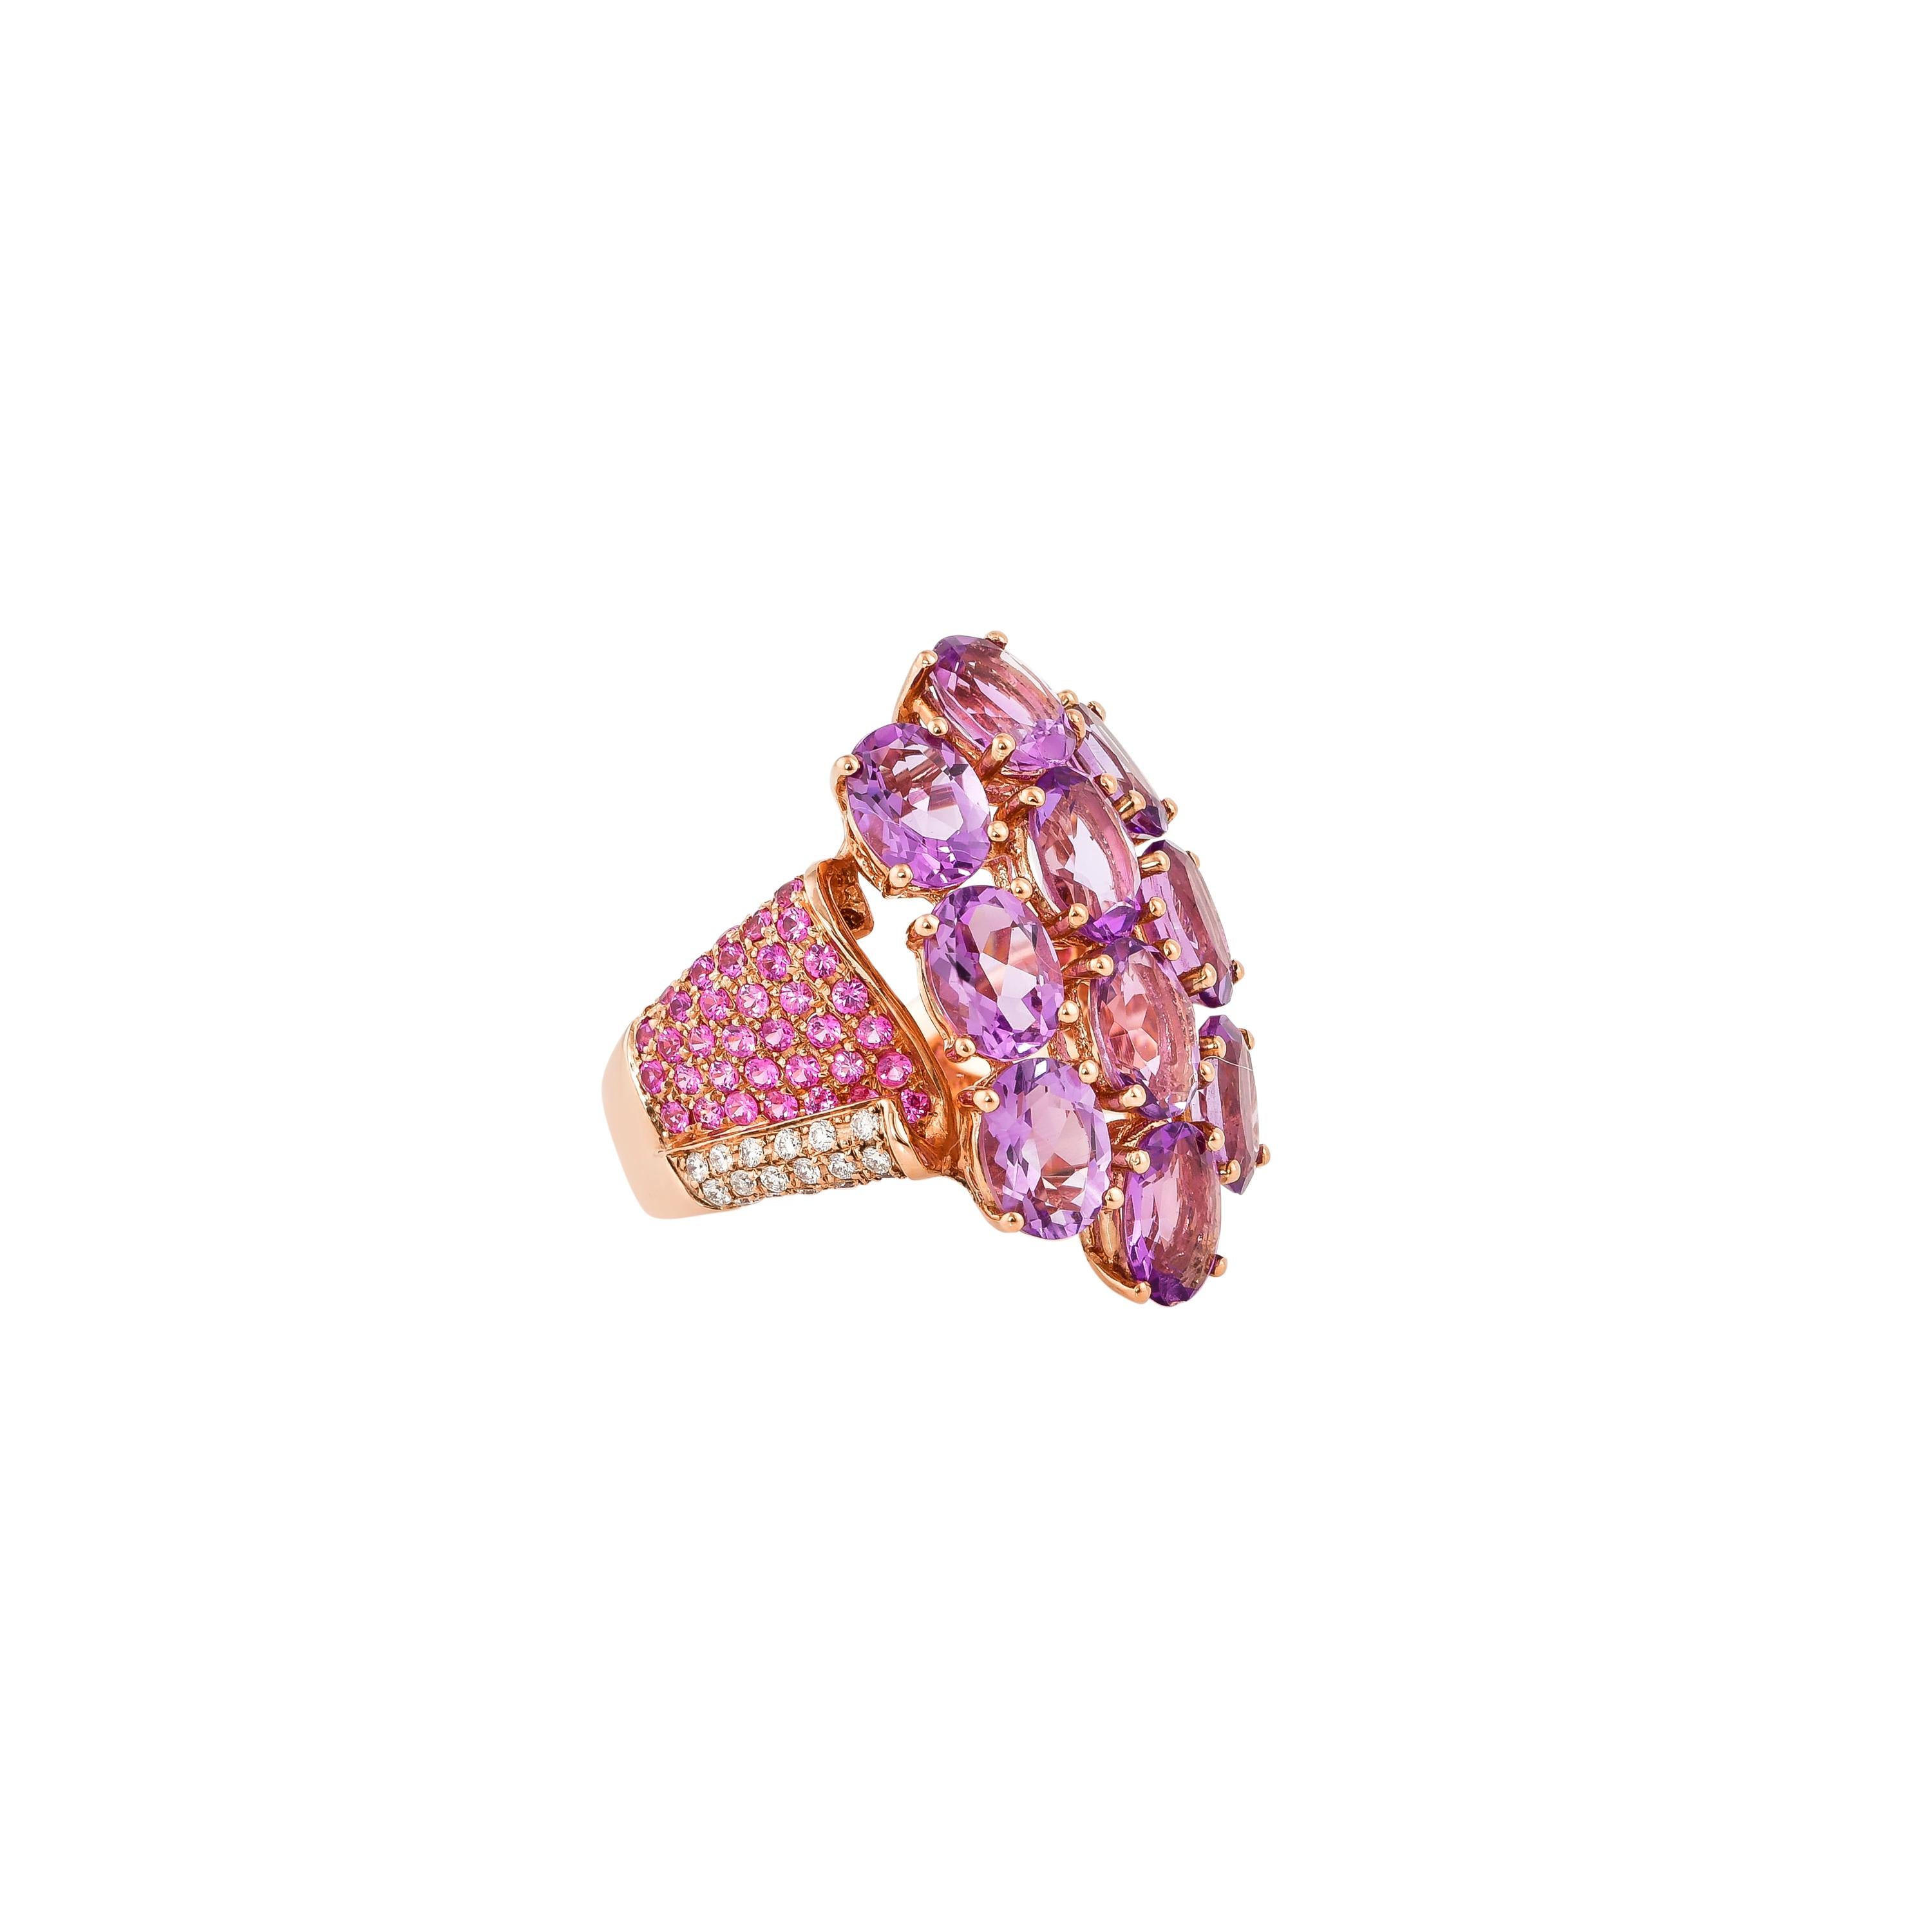 Glamorous Gemstones - Sunita Nahata started off her career as a gemstone trader, and this particular collection reflects her love for multi-colored semi-precious gemstones. This ring presents a cluster of the most vibrant Amethyst. These gems are